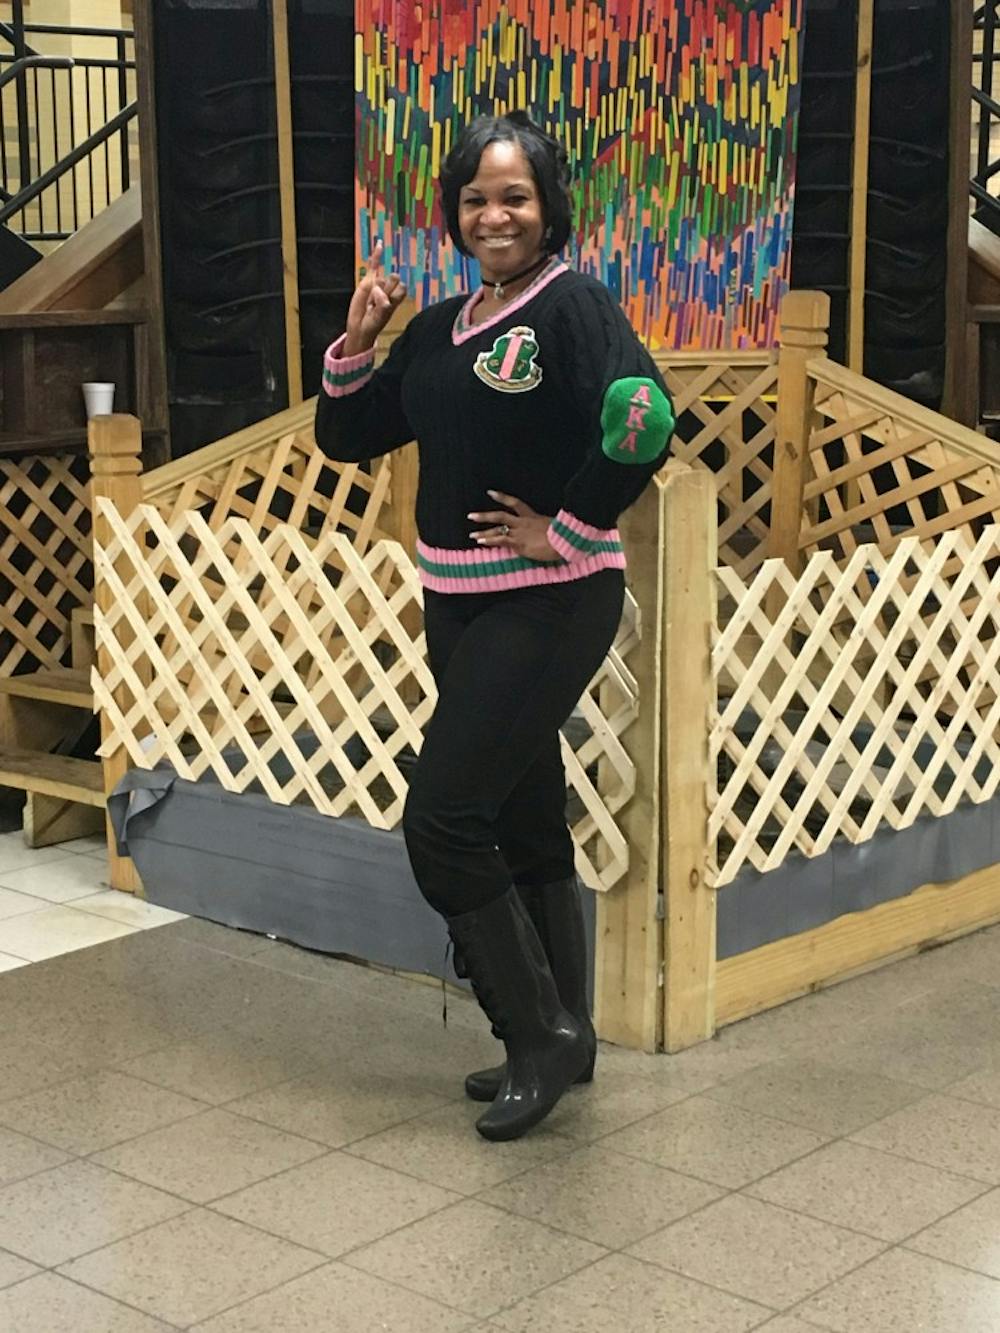 <p>Lisa McMurtry poses in her AKA Sorority gear at East English Village.</p>